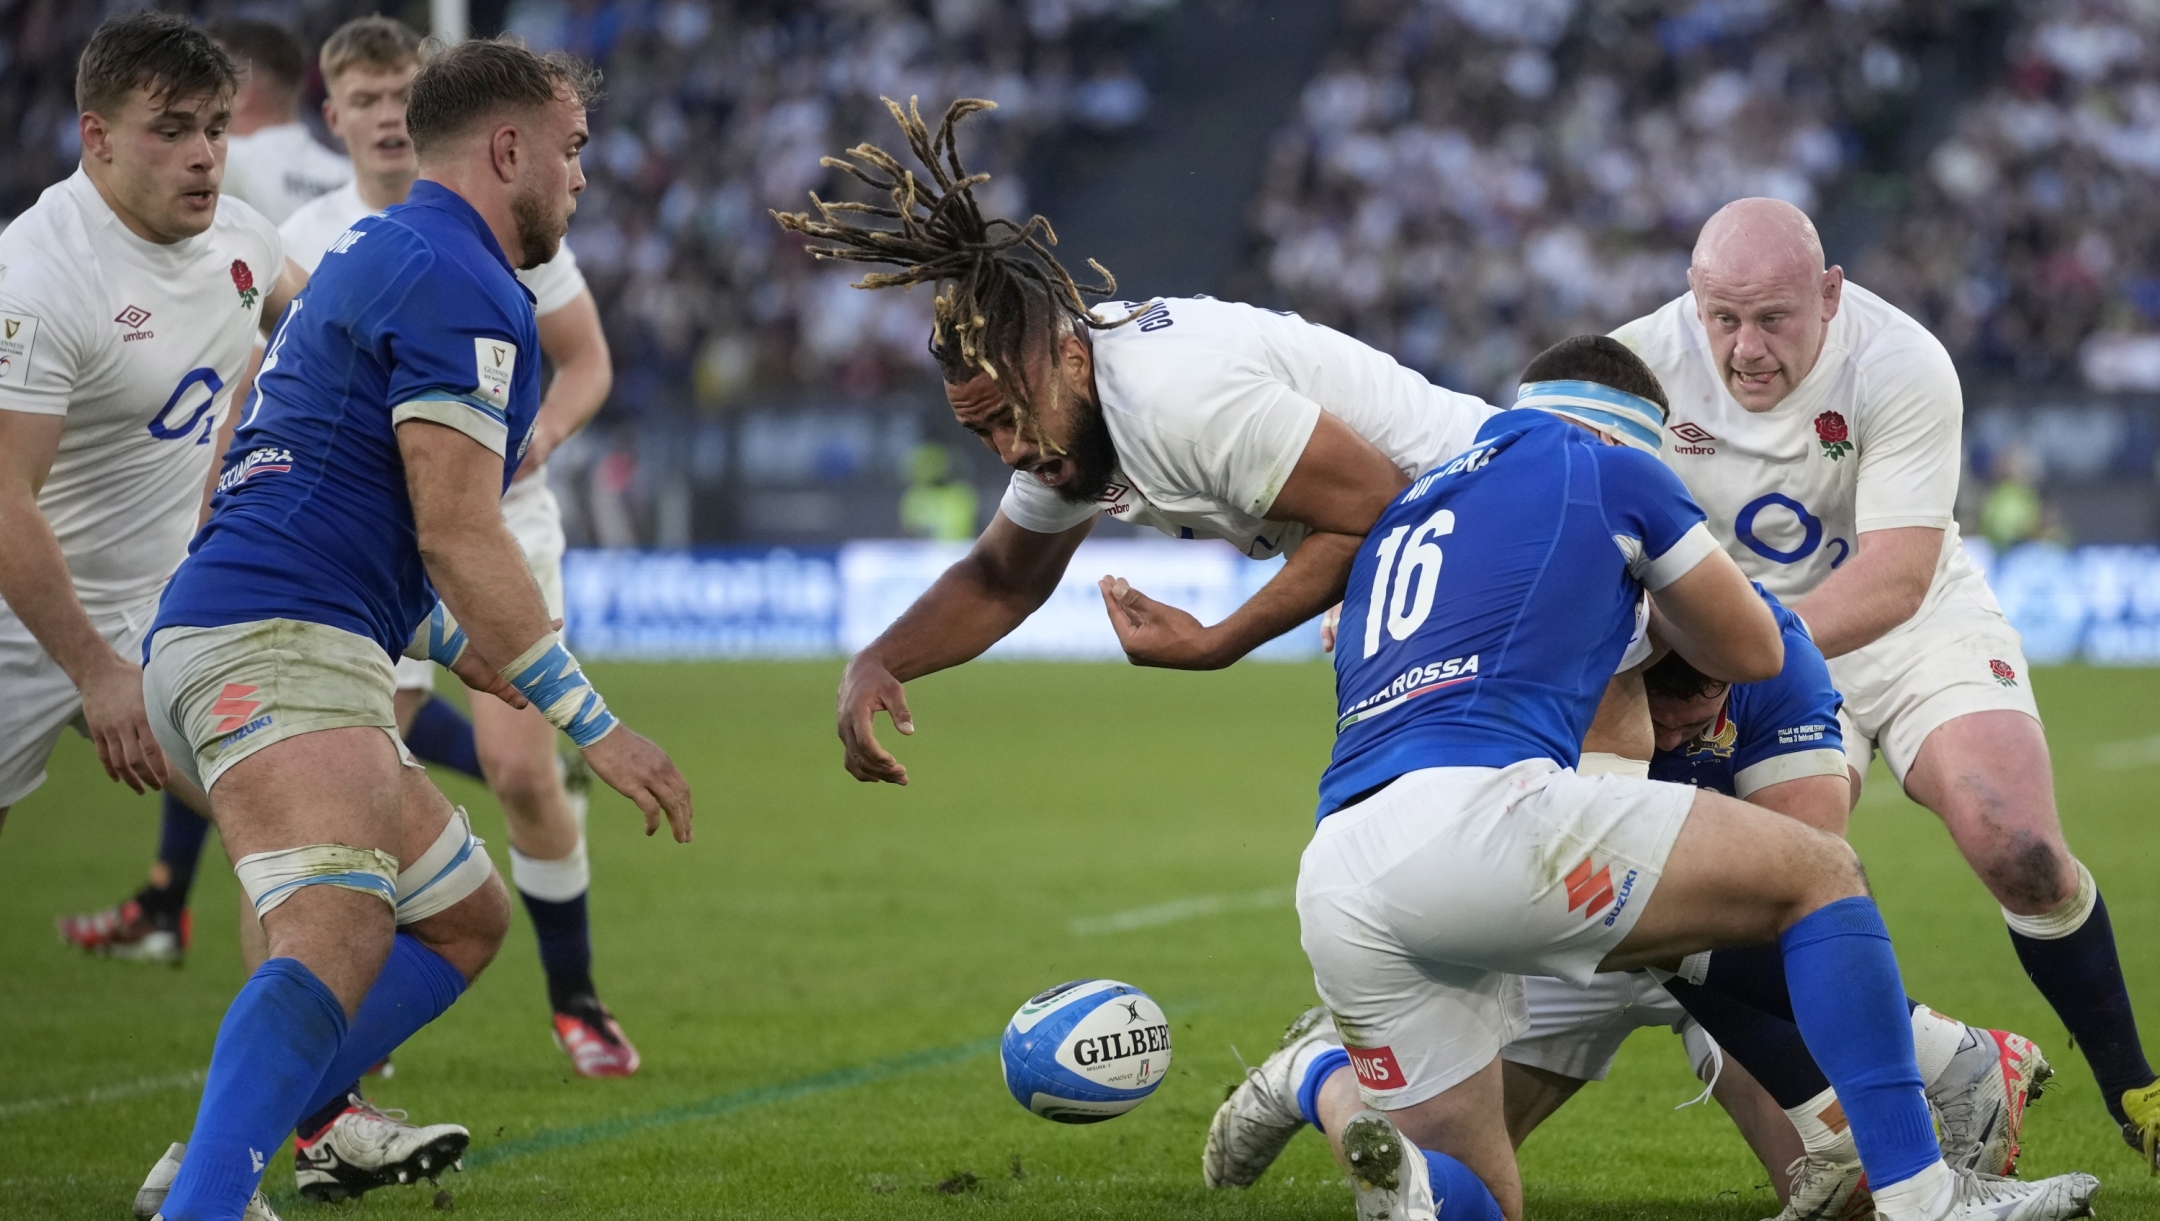 England's Chandler Cunningham-South, center, loses the ball as he is tackled by Italy's Giacomo Nicotera during the Six Nations rugby union match between Italy and England at Rome's Olympic Stadium, Saturday, Feb. 3, 2024. (AP Photo/Andrew Medichini)